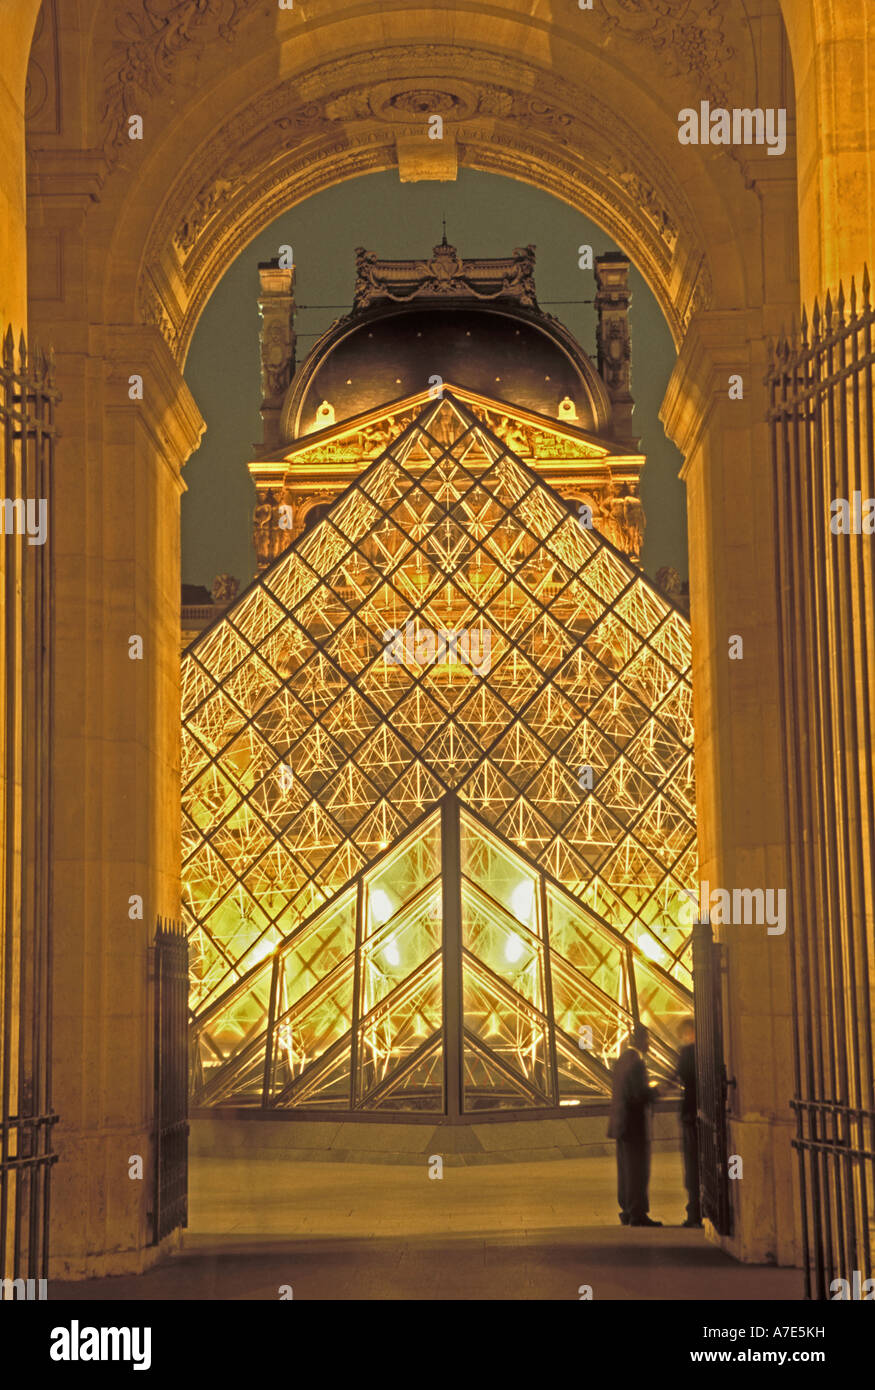 Europe France Paris P M Pei's Louvre pyramid seen through an arch in the Louvre at night Stock Photo